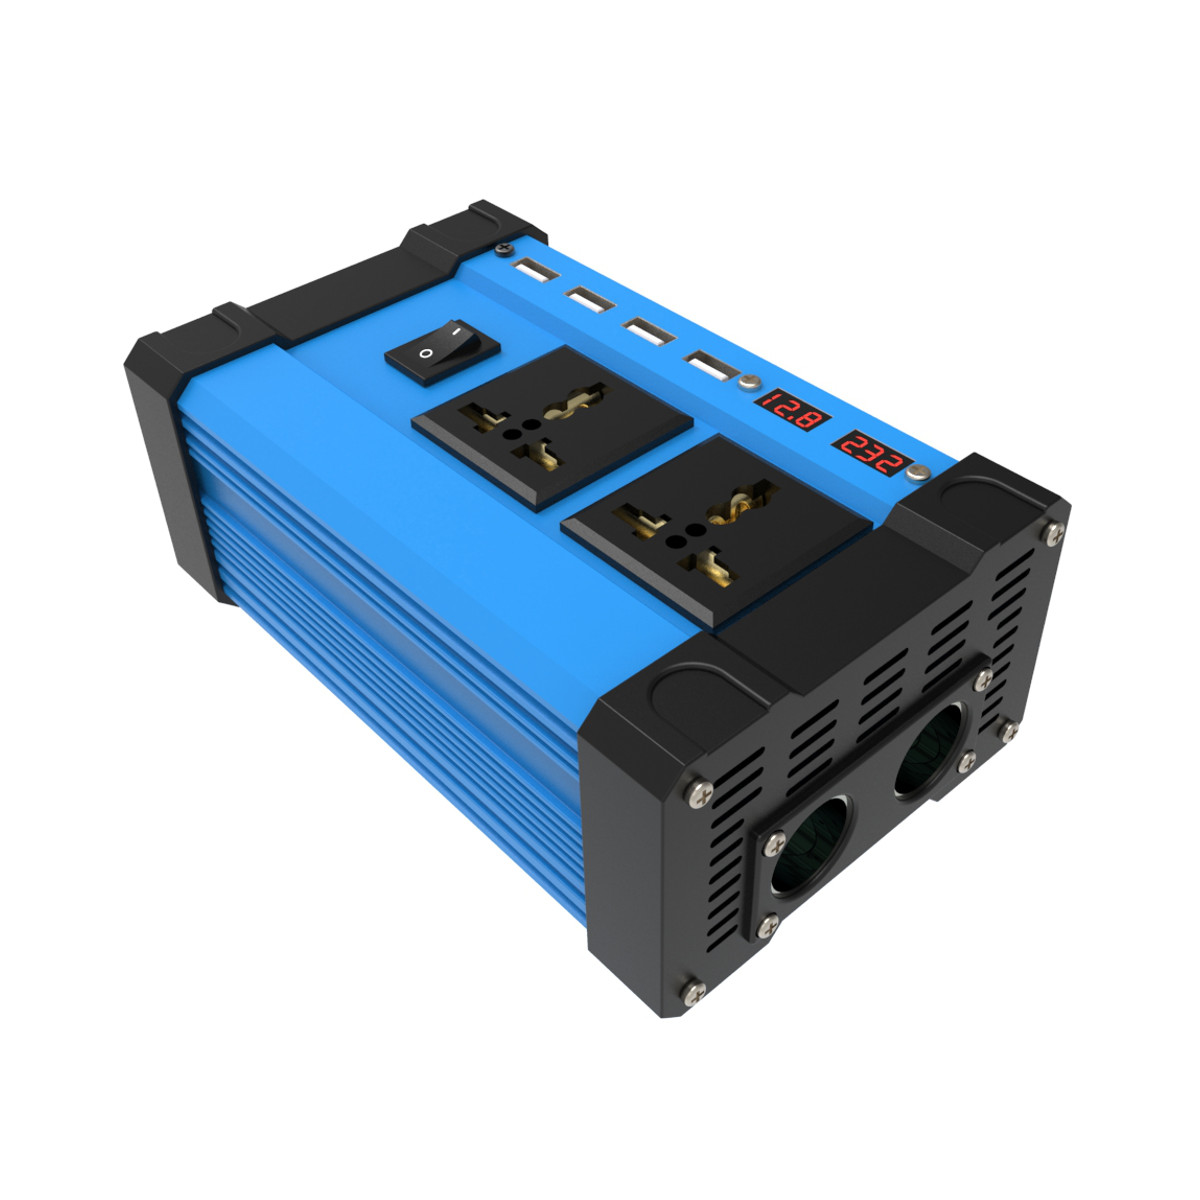 1200W Peak Car Power Inverter DC 12V to AC 110/220V Four USB Modified Sine Wave Converter with Colorful LCD Screen